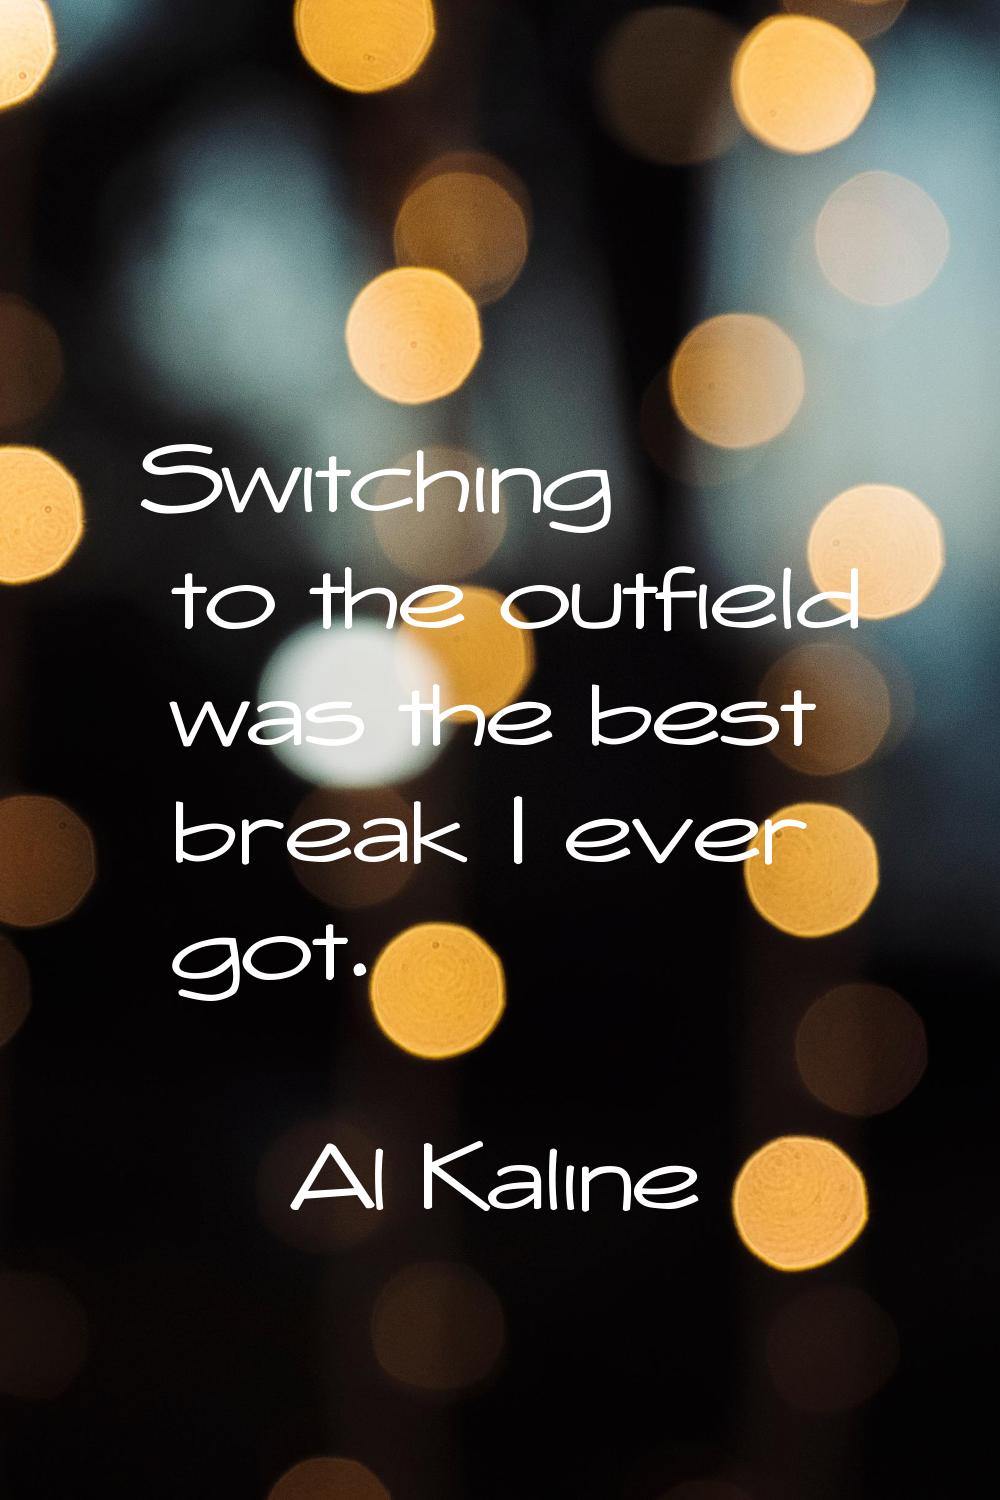 Switching to the outfield was the best break I ever got.